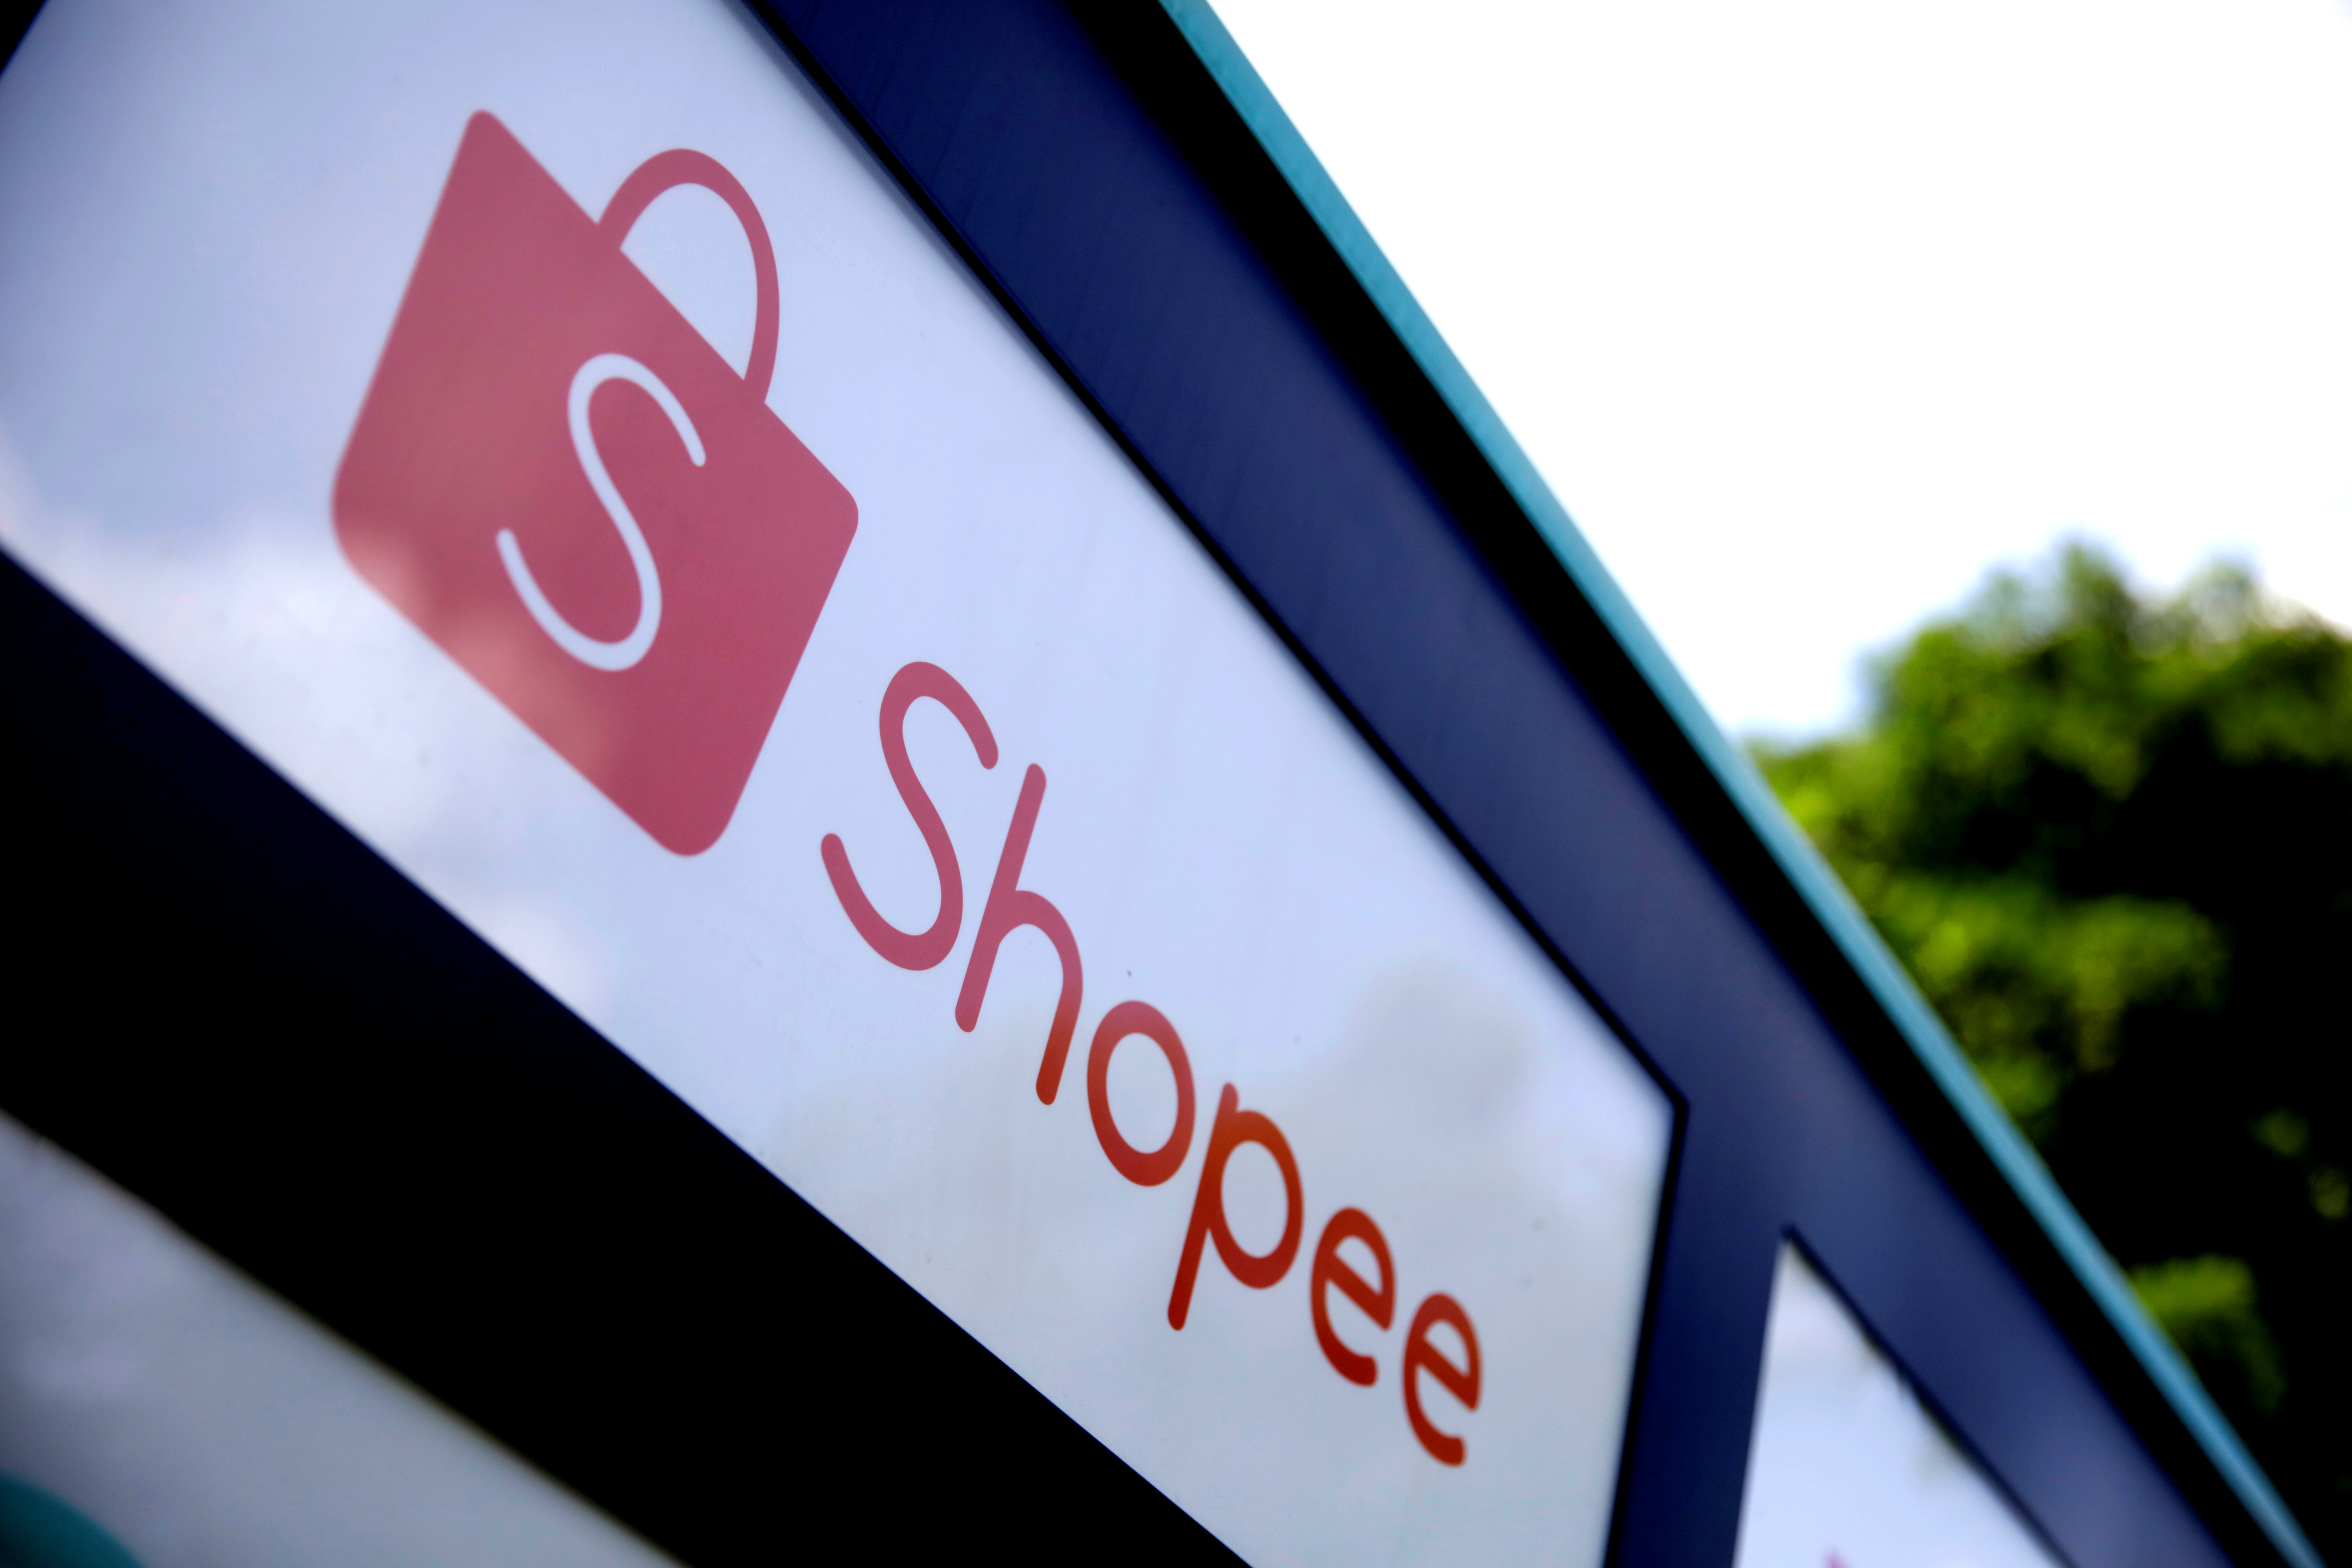 The Shopee logo is seen at an office building in Singapore